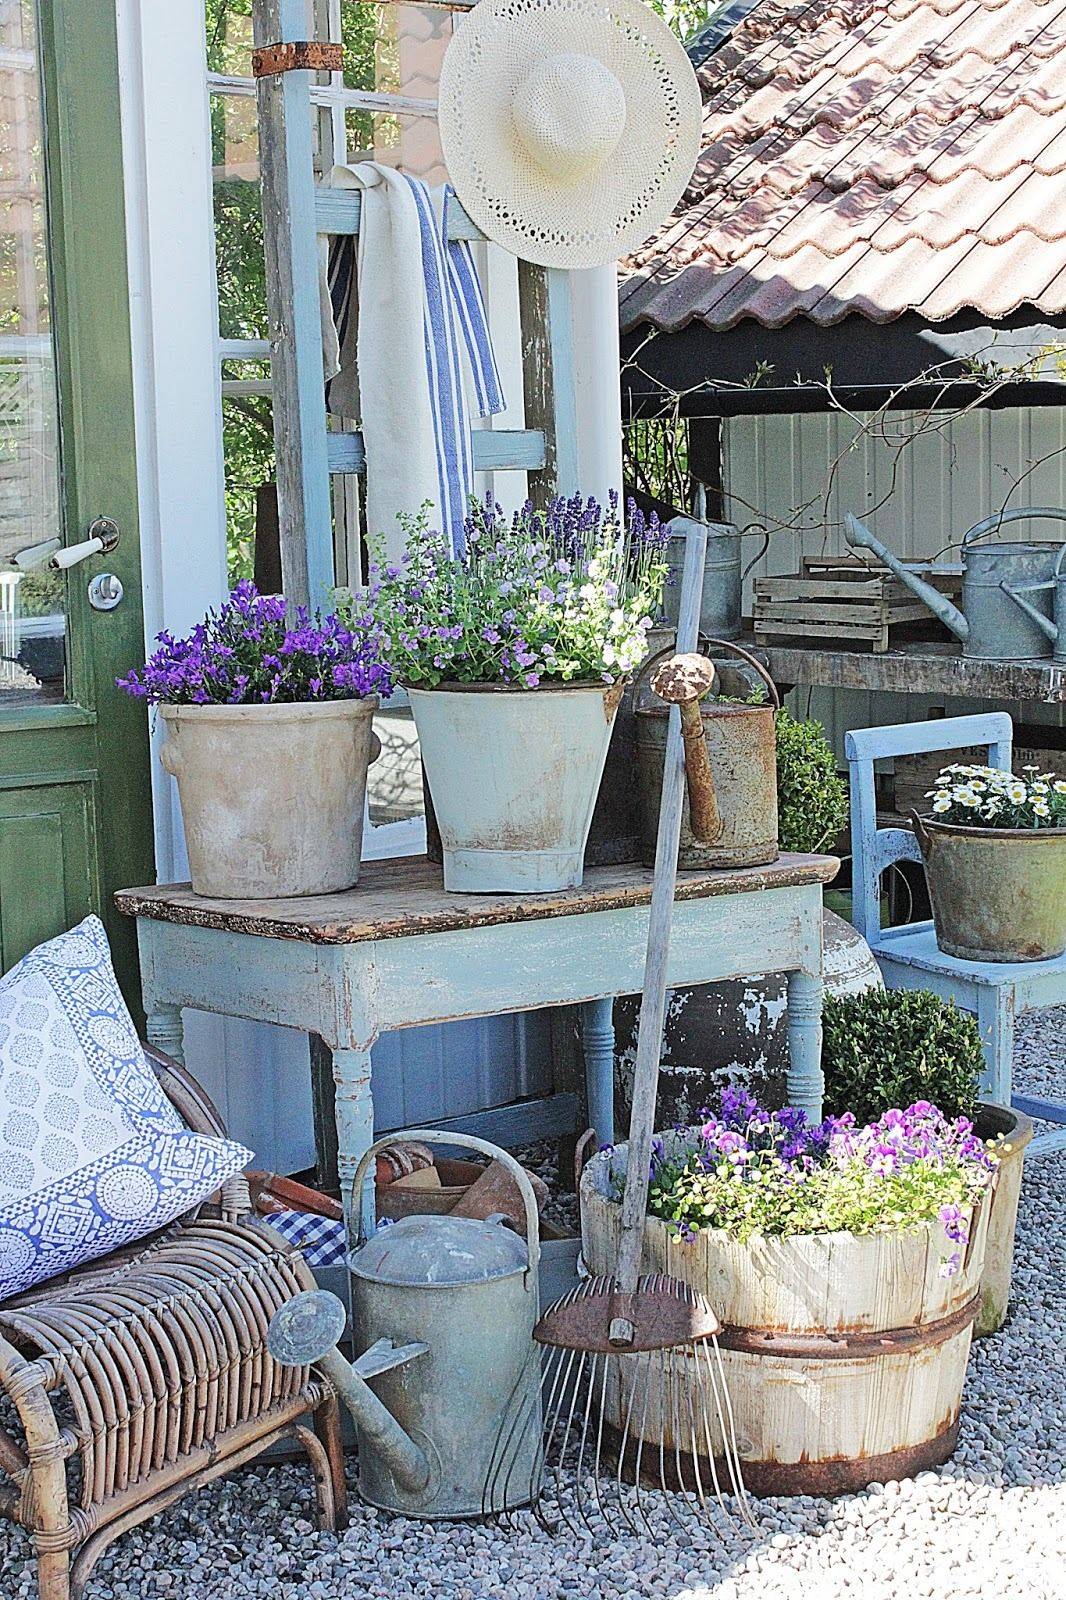 Rustic And Vintage Garden Styling Tips